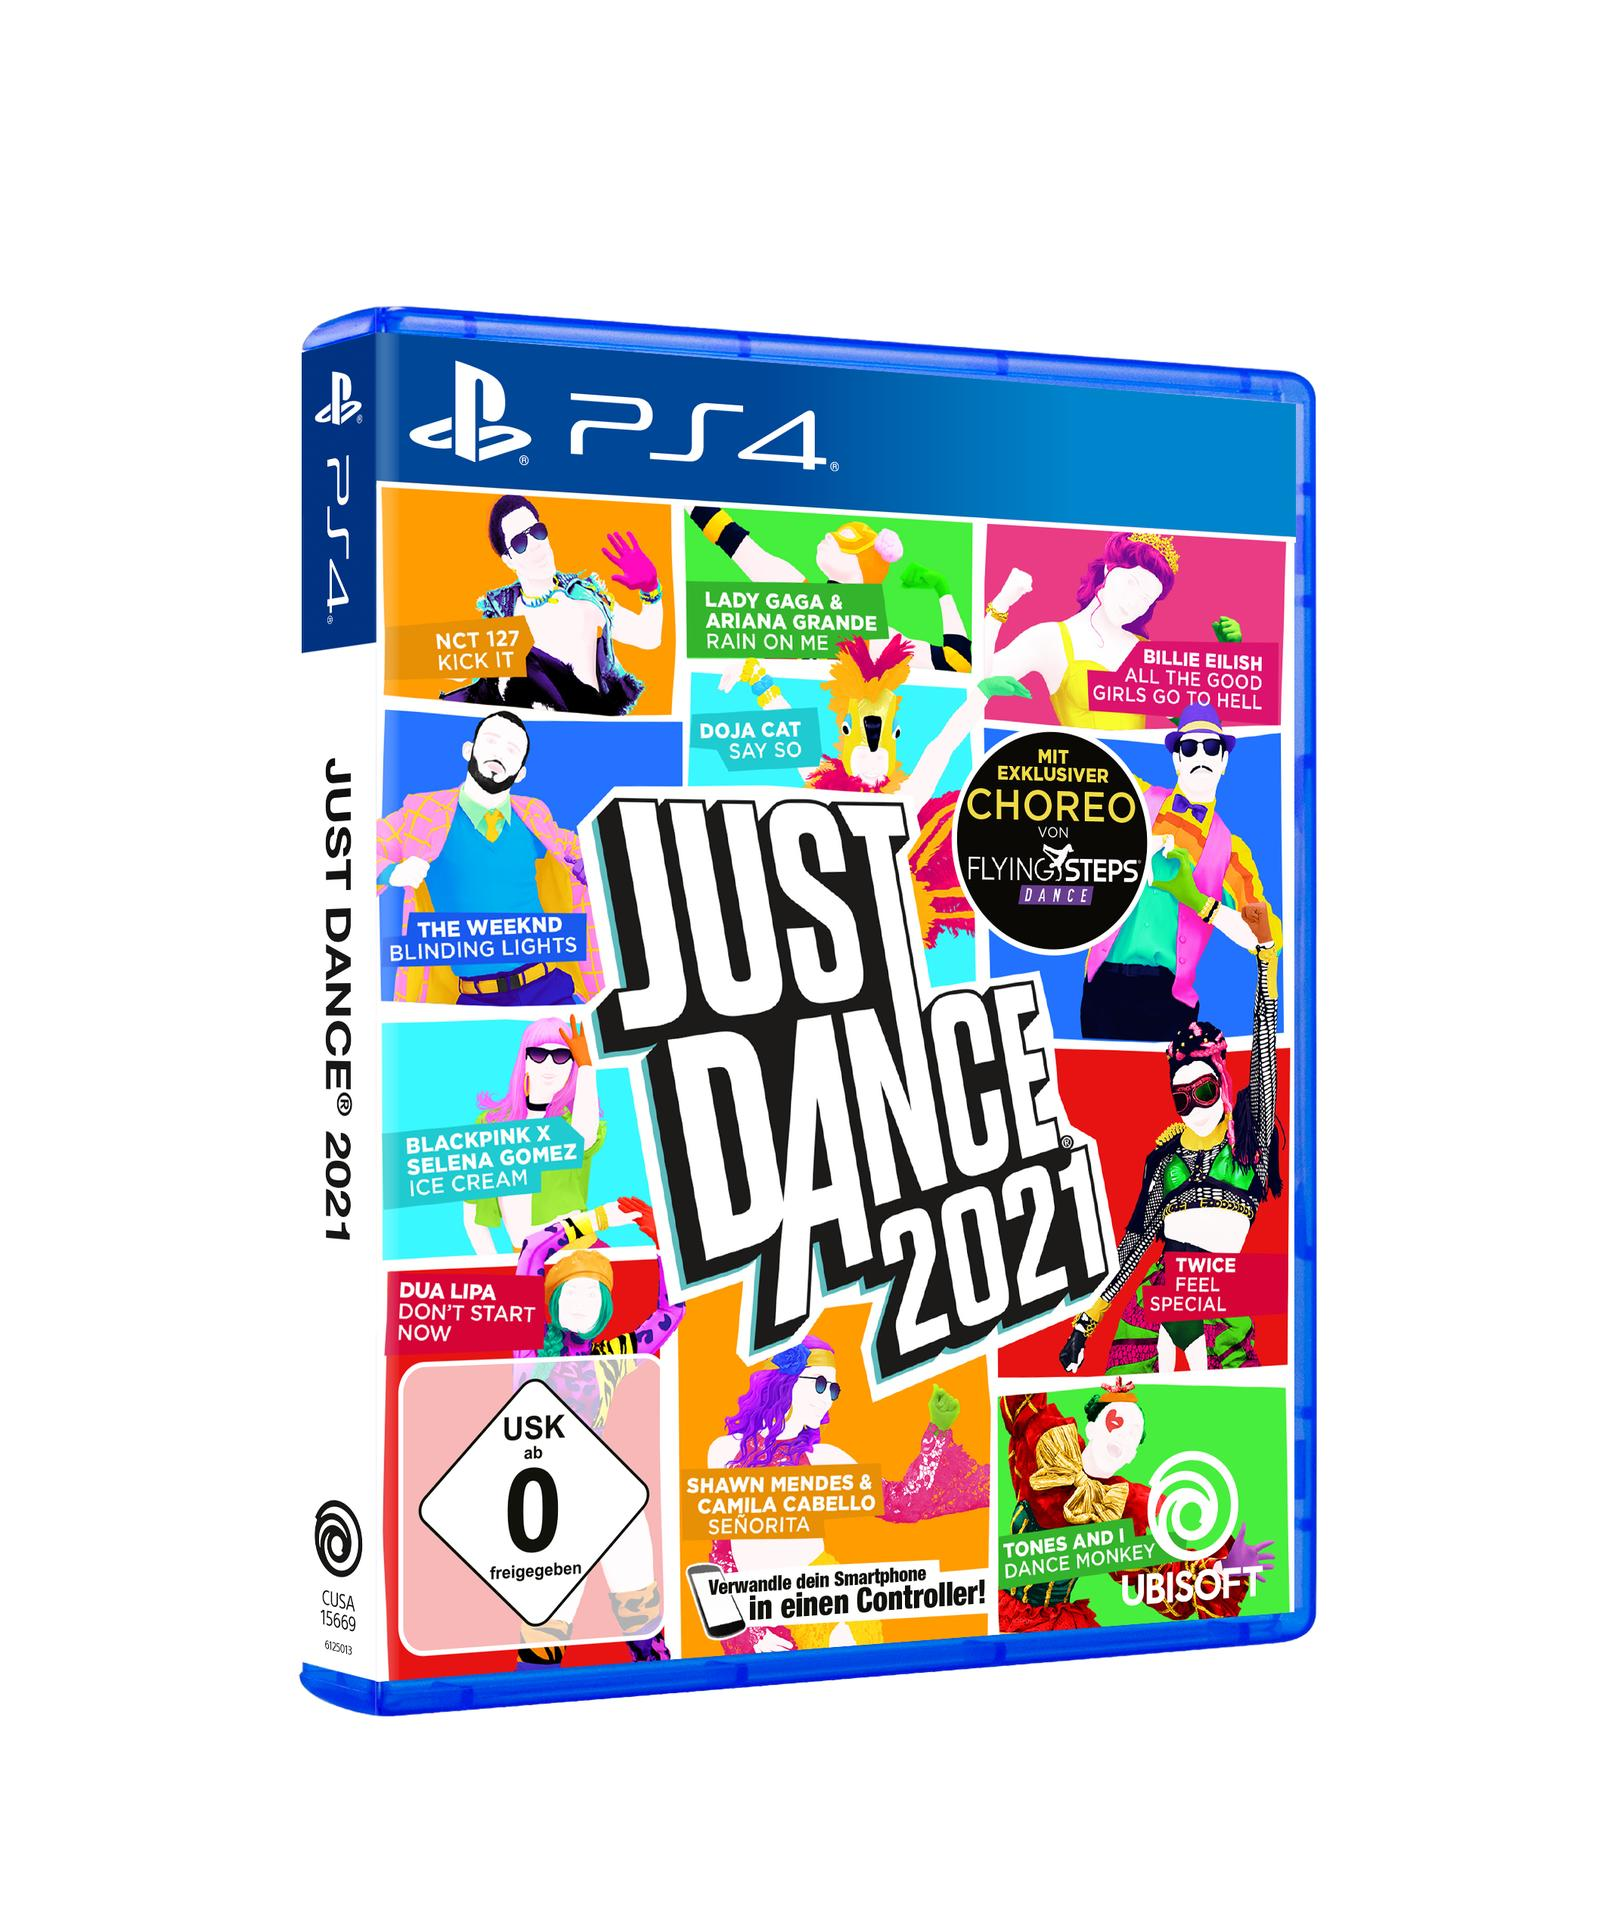 PS4 JUST 2021 - 4] DANCE [PlayStation